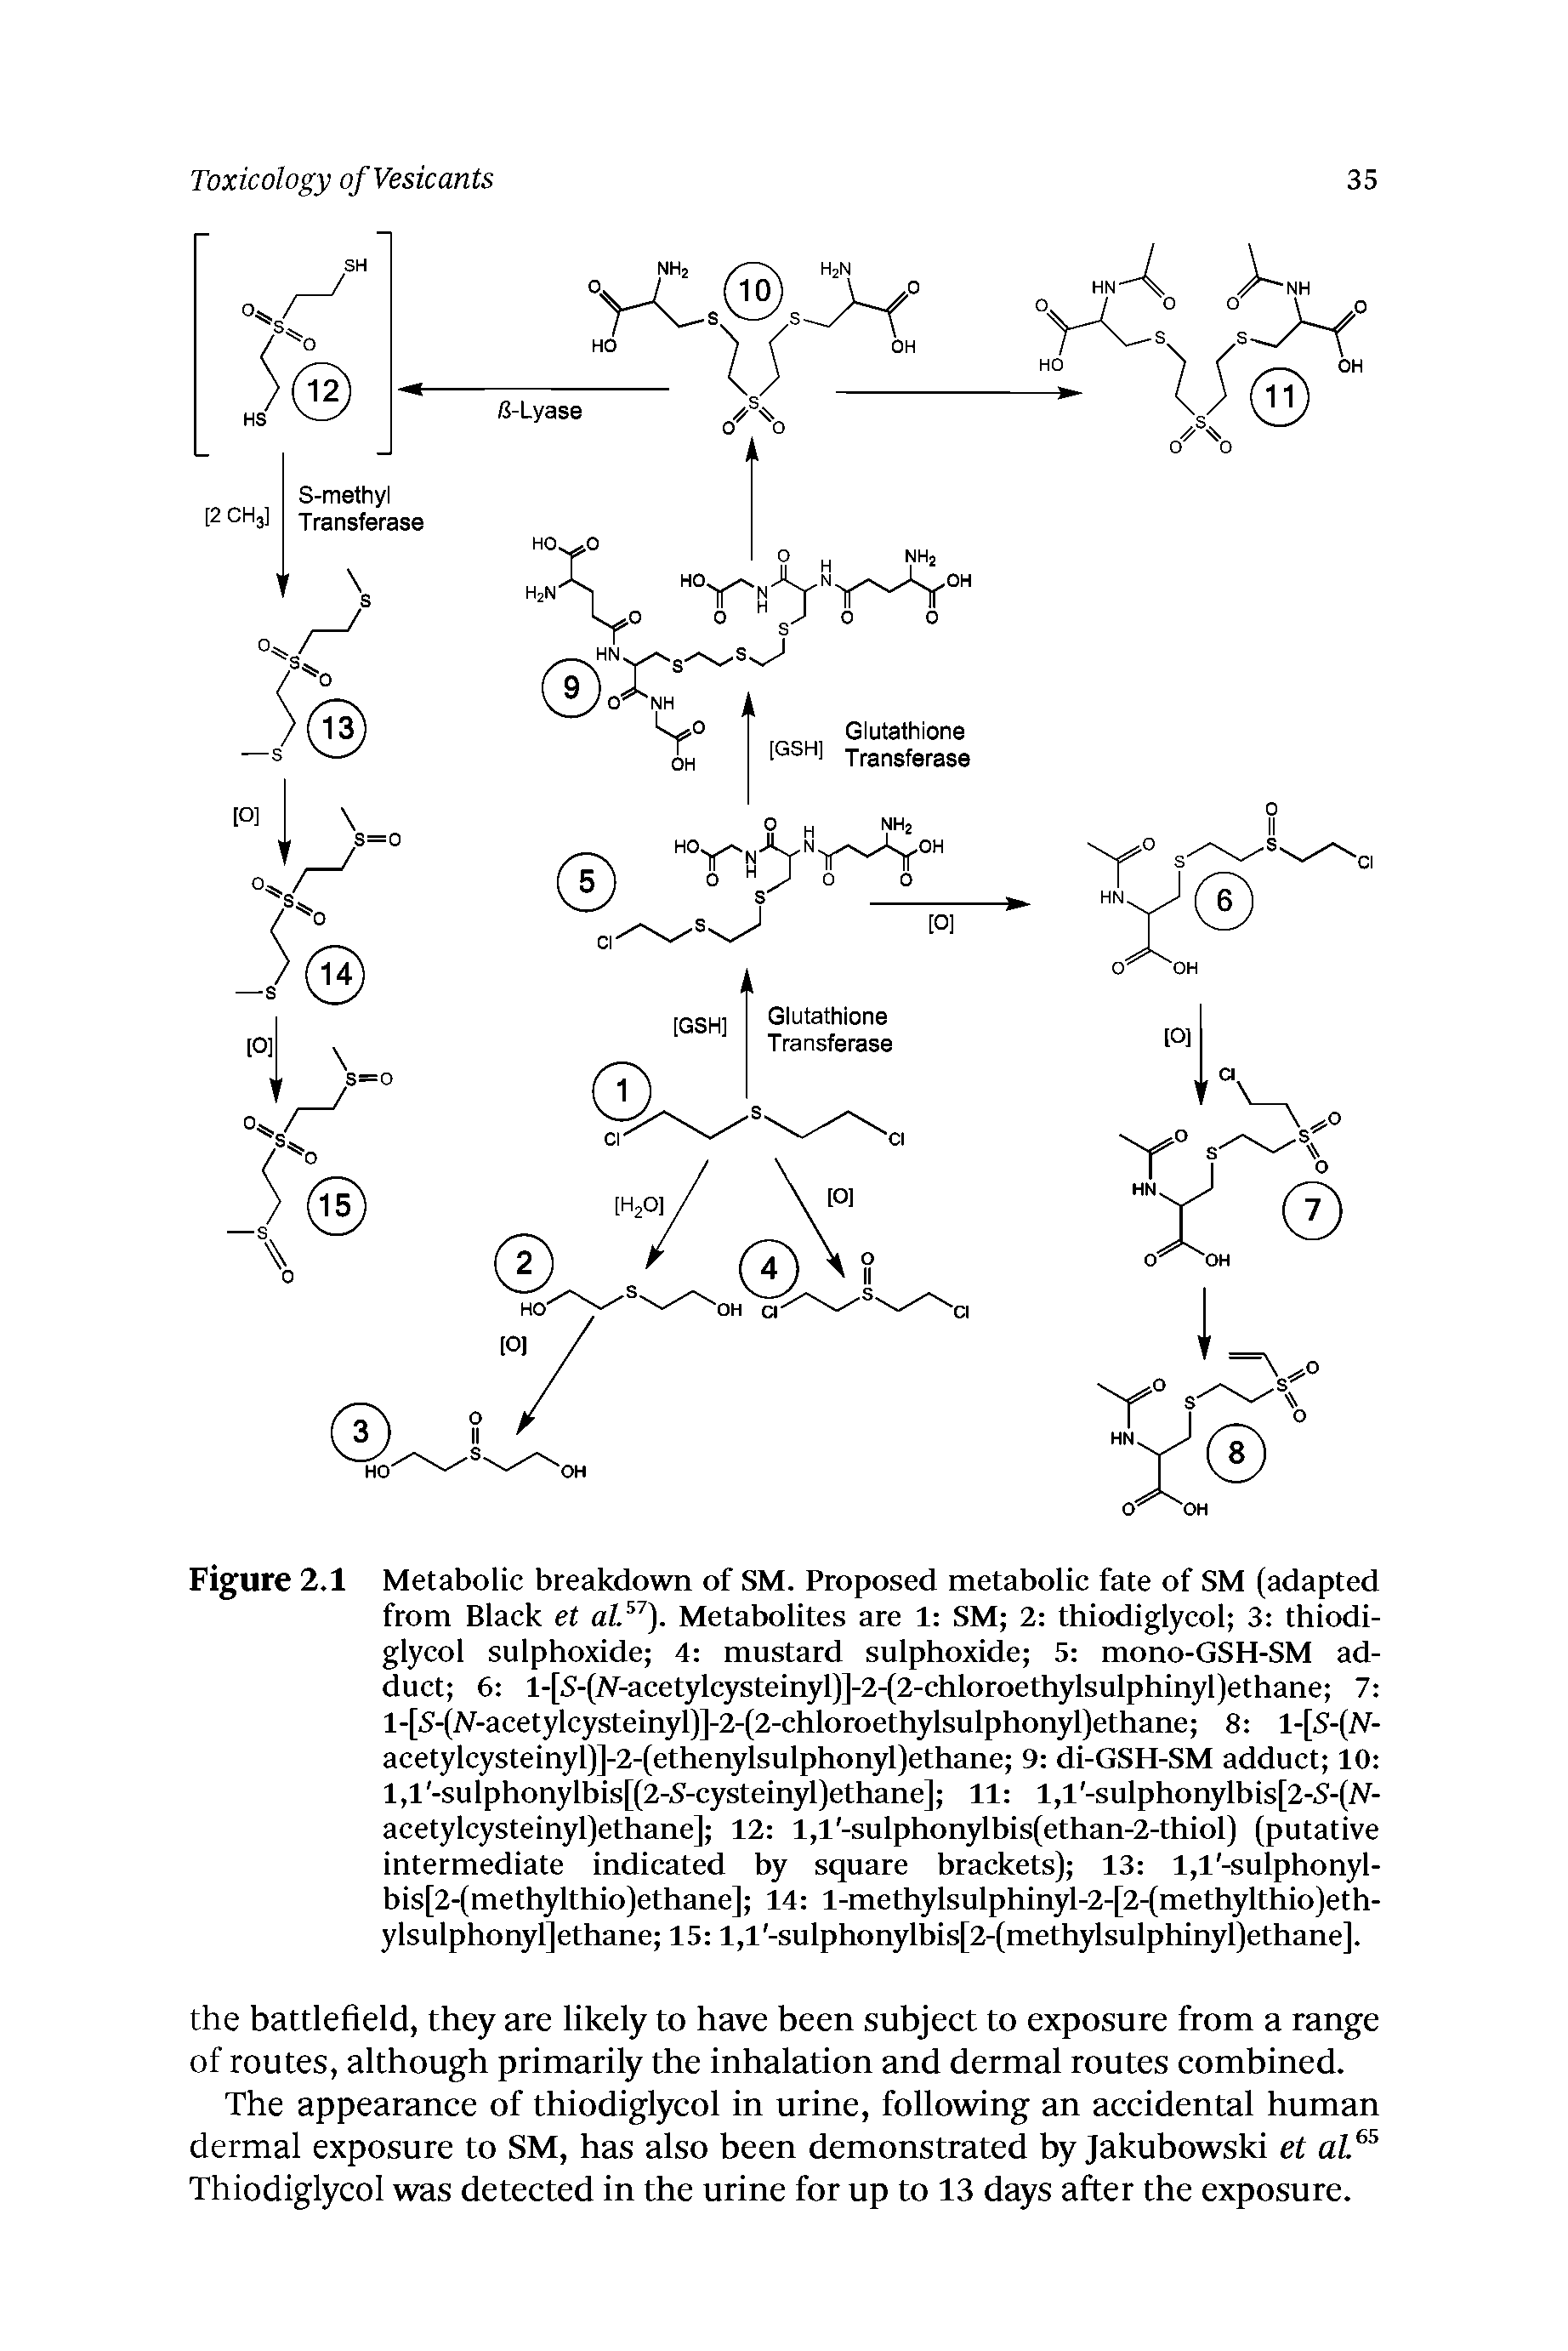 Figure 2.1 Metabolic breakdown of SM. Proposed metabolic fate of SM (adapted from Black et alX). Metabolites are 1 SM 2 thiodiglycol 3 thiodi-glycol sulphoxide 4 mustard sulphoxide 5 mono-GSH-SM adduct 6 l-[S-(iV-acetylcysteinyl)]-2-(2-chloroethylsulphinyl)ethane 7 l-[S-(Af-acetylcysteinyl)]-2-(2-chloroethylsulphonyl)ethane 8 1-[S-(N-acetylcysteinyl)]-2-(ethenylsulphonyl)ethane 9 di-GSH-SM adduct 10 l,l -sulphonylbis[(2-5 -cysteinyl)ethane] 11 l,l -sulphonylbis[2-S-(Af-acetylcysteinyl)ethane] 12 l,l -sulphonylbis(ethan-2-thiol) (putative intermediate indicated by square brackets) 13 l,l -sulphonyl-bis[2-(methylthio)ethane] 14 l-methylsulphinyl-2-[2-(methylthio)eth-ylsulphonyljethane 15 l,l -sulphonylbis[2-(methylsulphinyl)ethane].